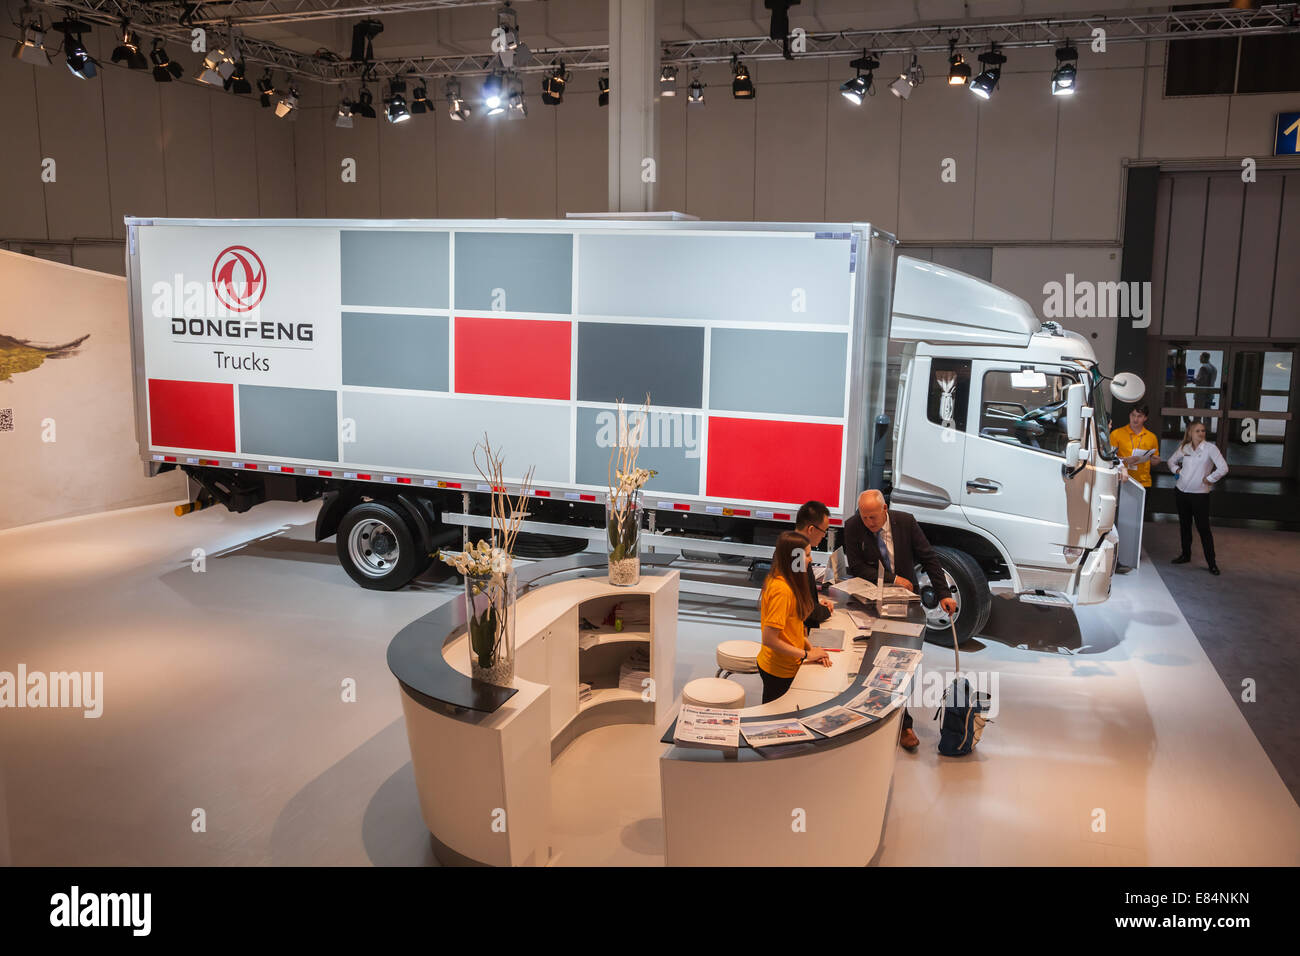 Chinese DONGFENG TRUCKS company stand at the 65th IAA Commercial Vehicles Fair 2014 in Hannover, Germany Stock Photo